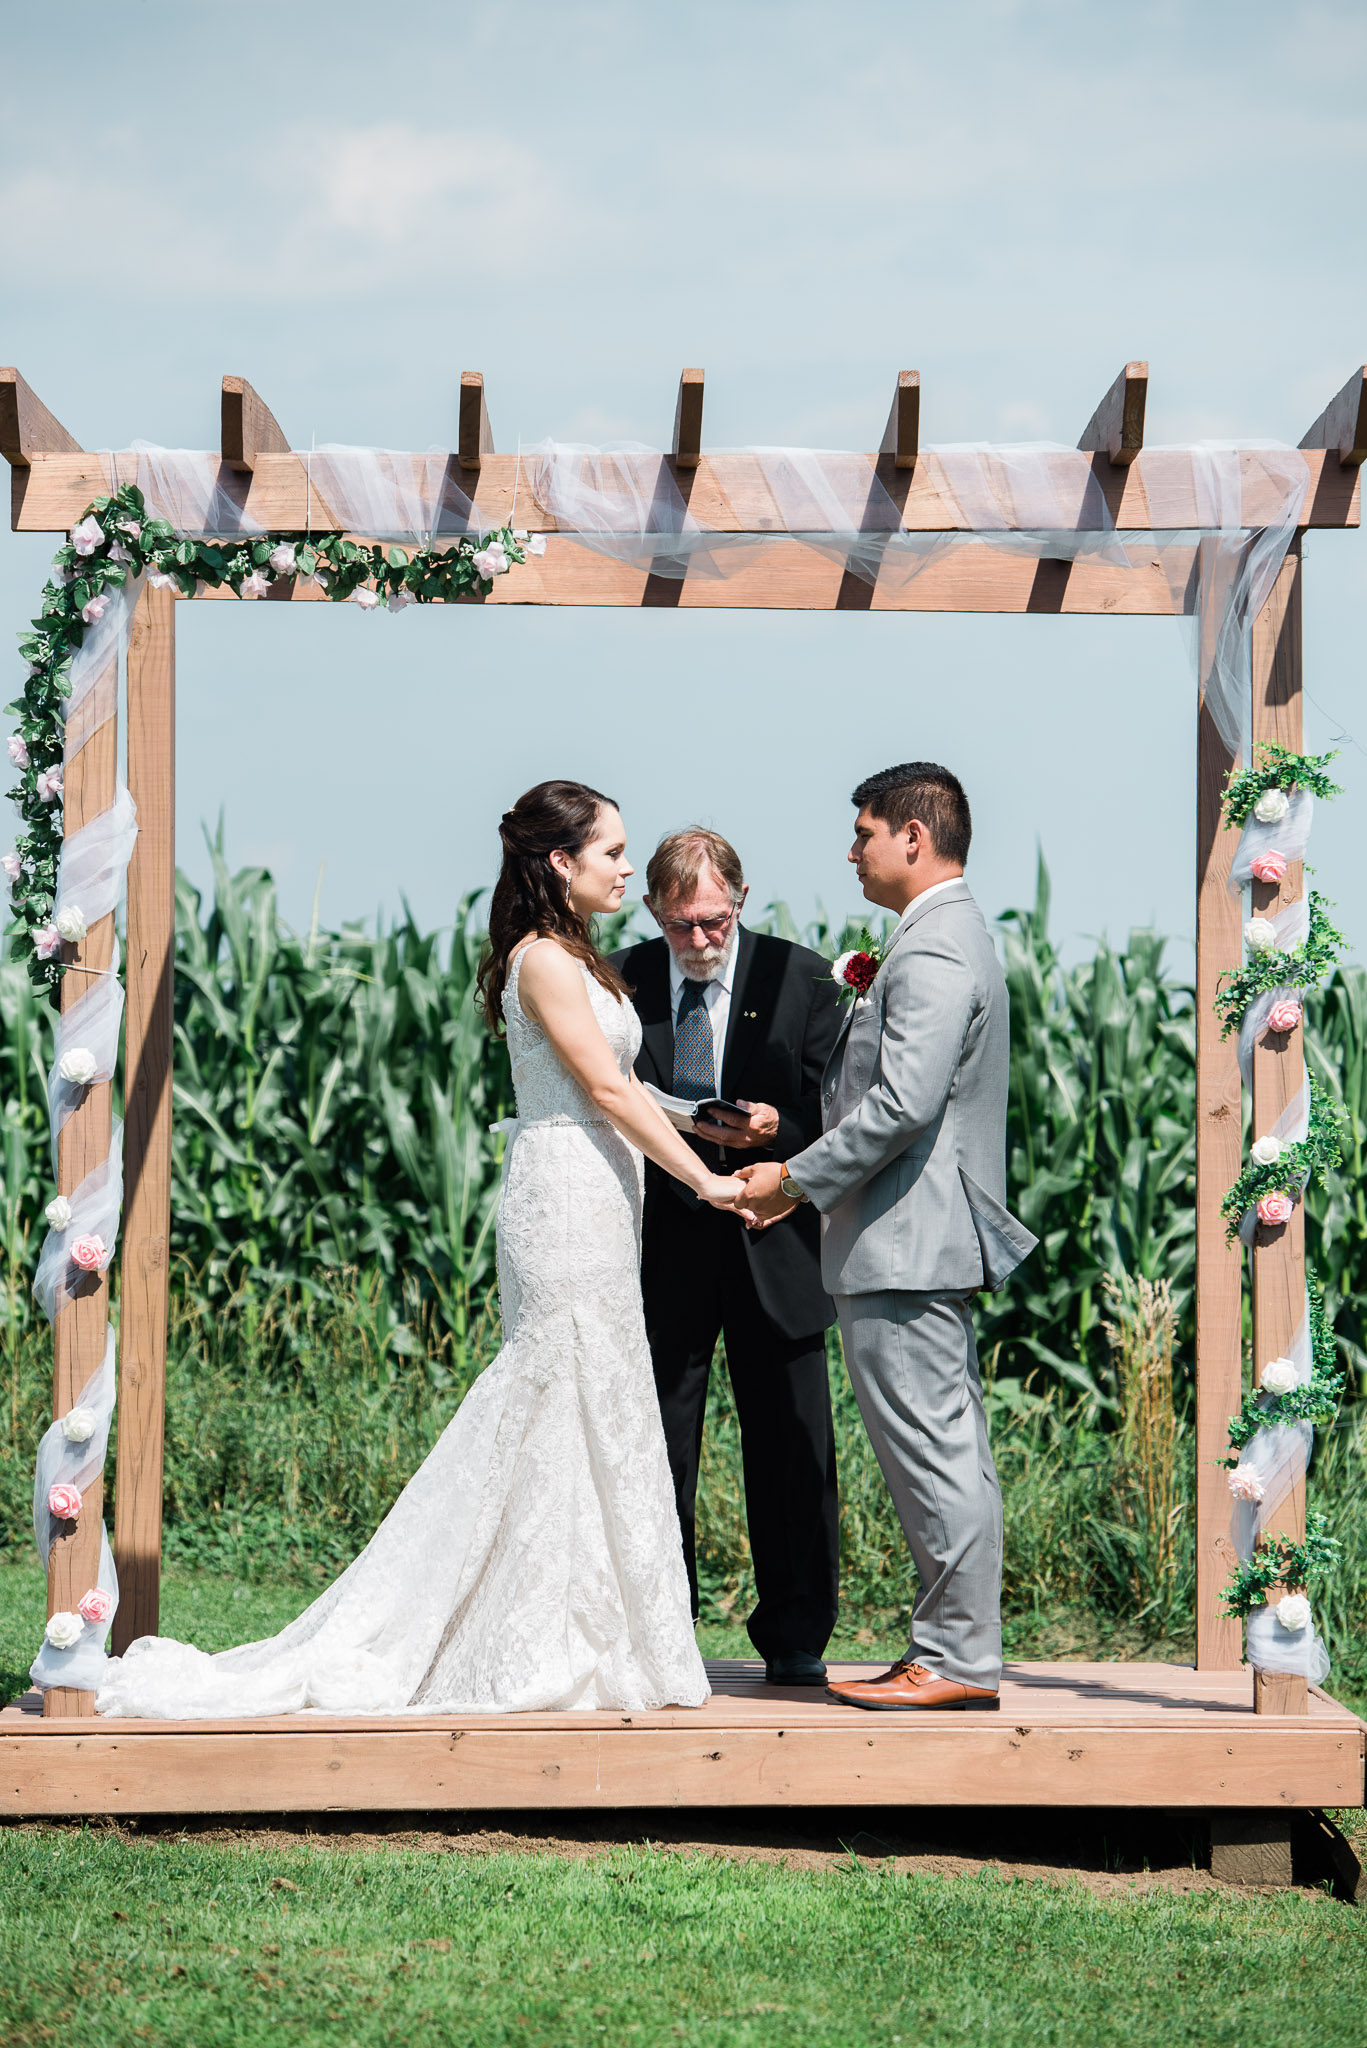 Outdoor Ceremony, Pittsburgh Wedding Photographer, The Event Barn at Highland Farms, Somerset PA-9642.jpg